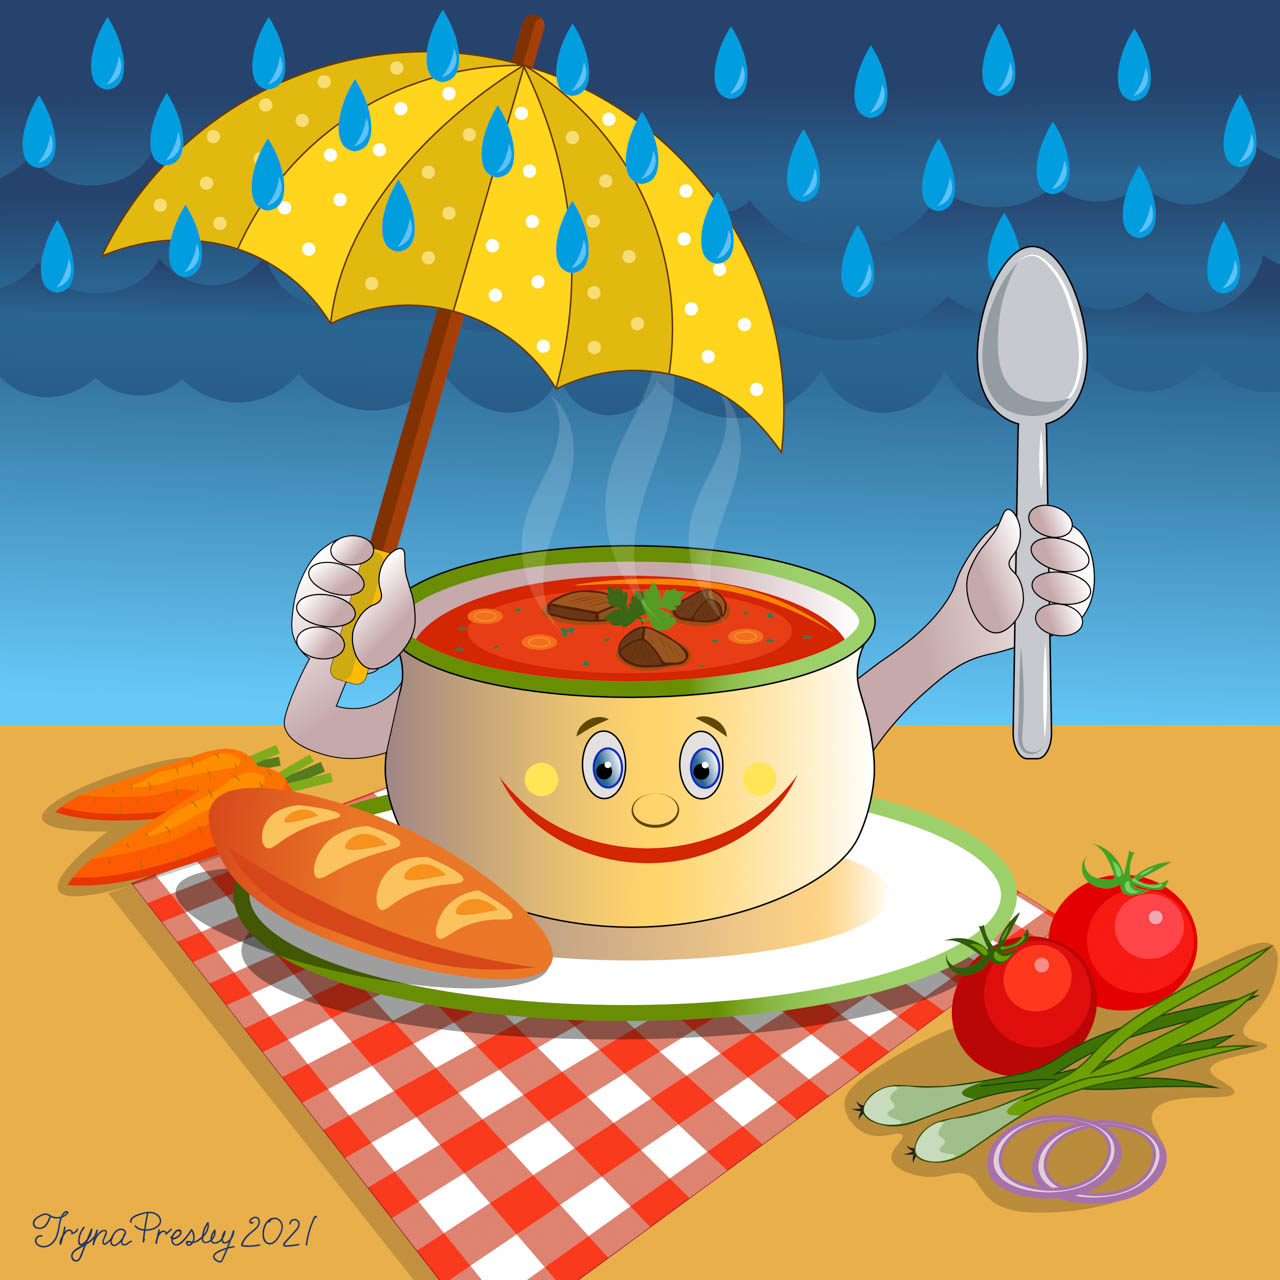 Illustration by Iryna Presley of a smiling soup pot, holding an umbrella to keep rain off of its head